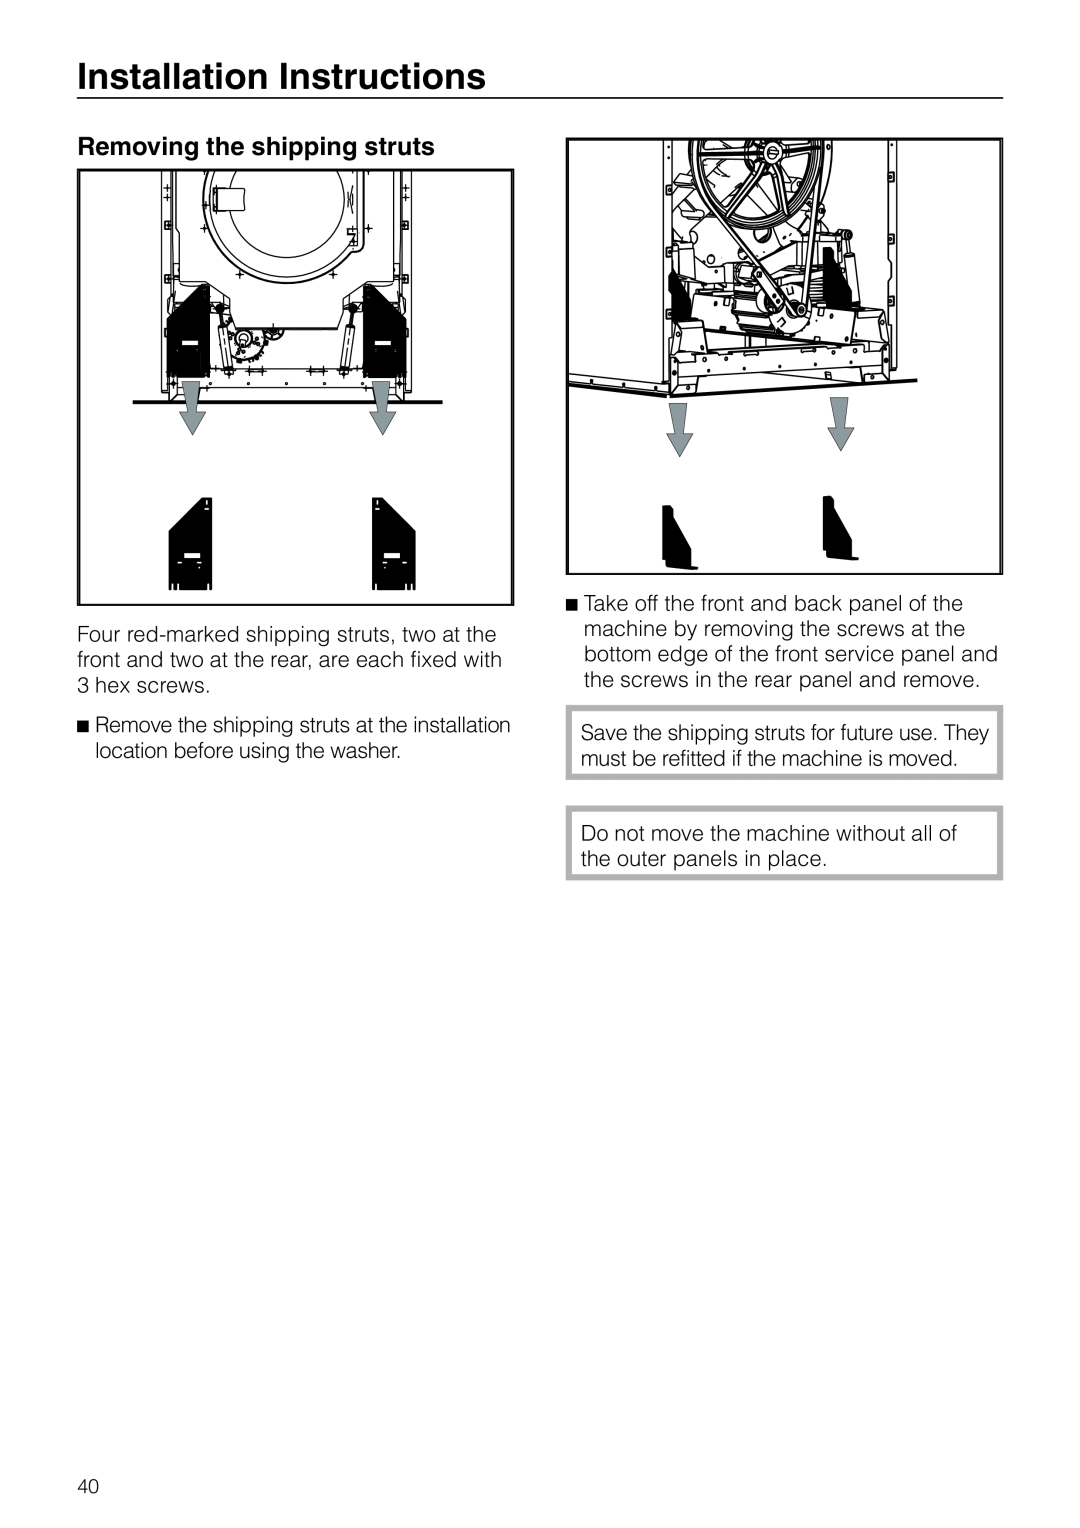 Miele PW 6161, PW 6101, PW 6131, PW 6201 operating instructions Removing the shipping struts, Installation Instructions 